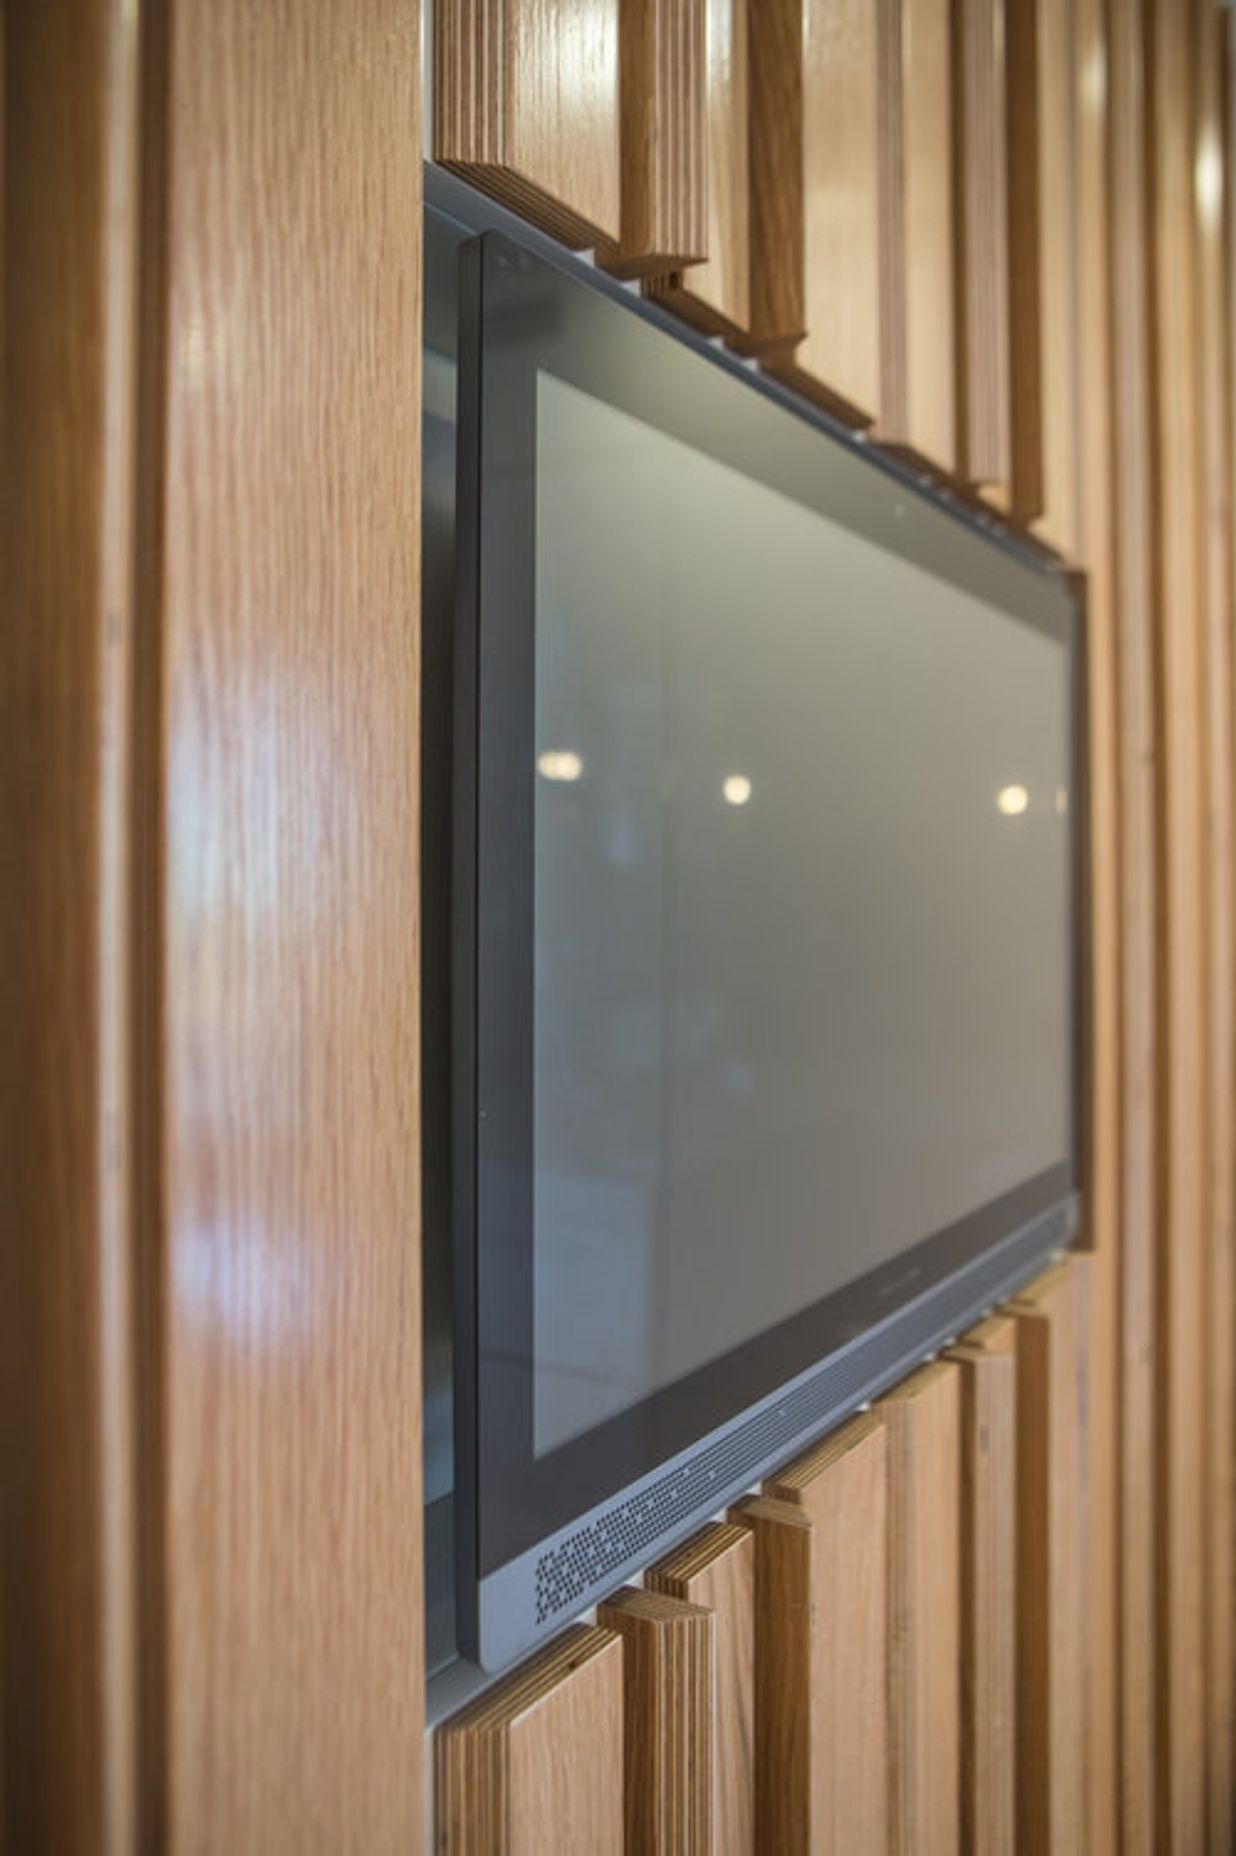 The digital screen inset into the oak plywood feature wall.